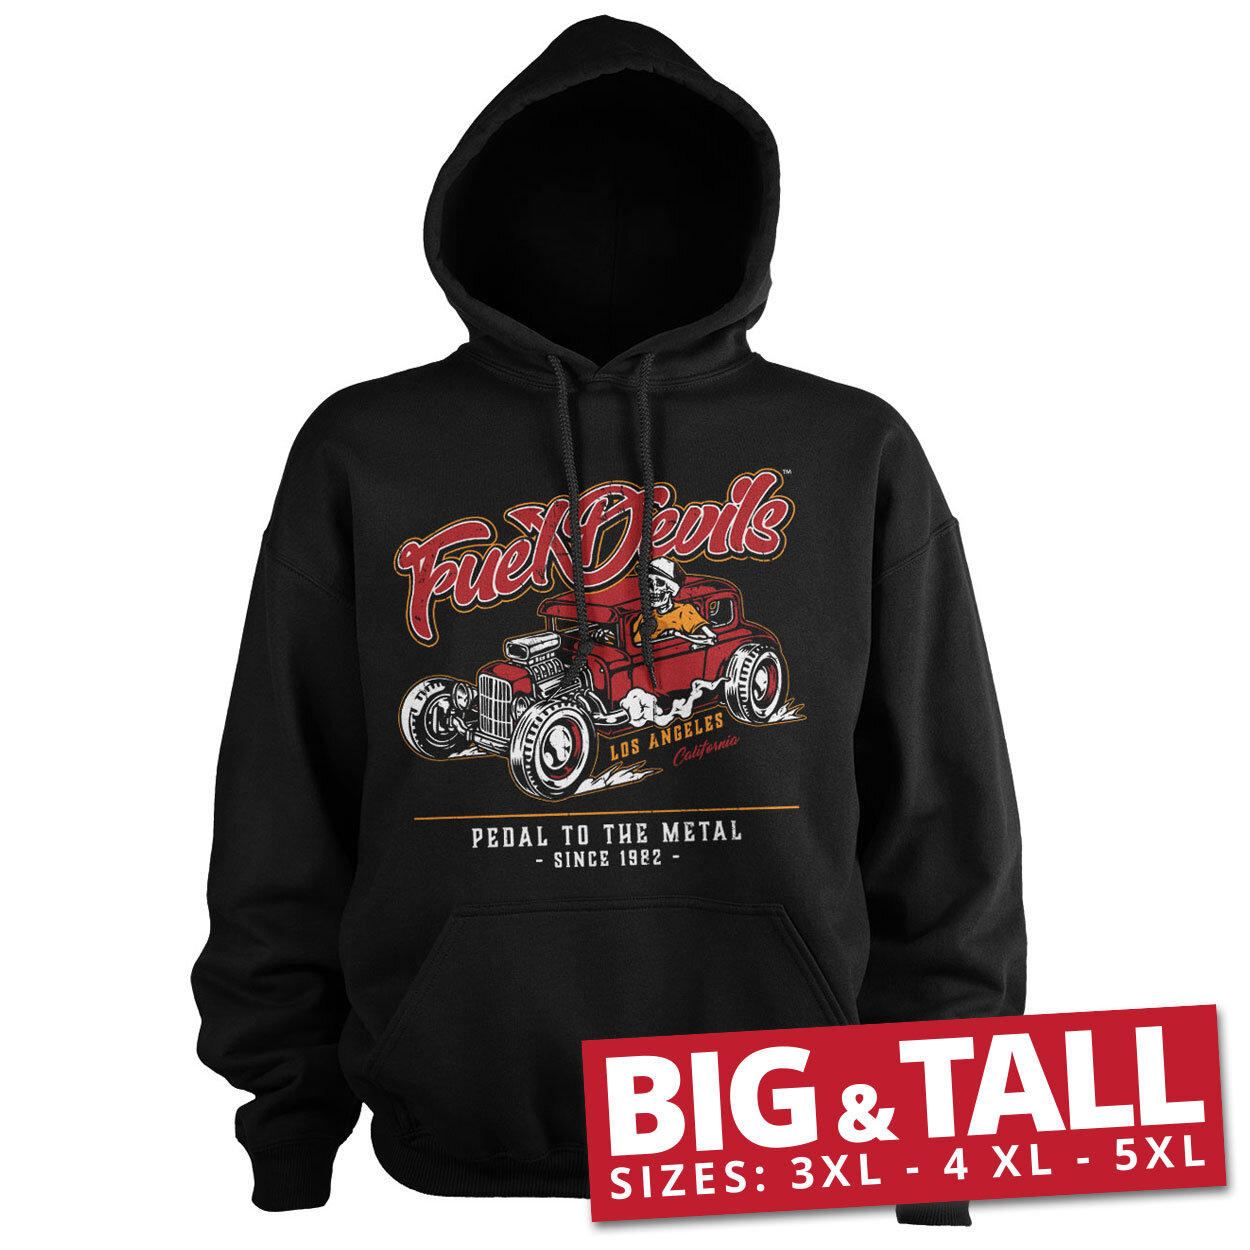 Fuel Devils - Pedal To The Metal Big & Tall Hoodie